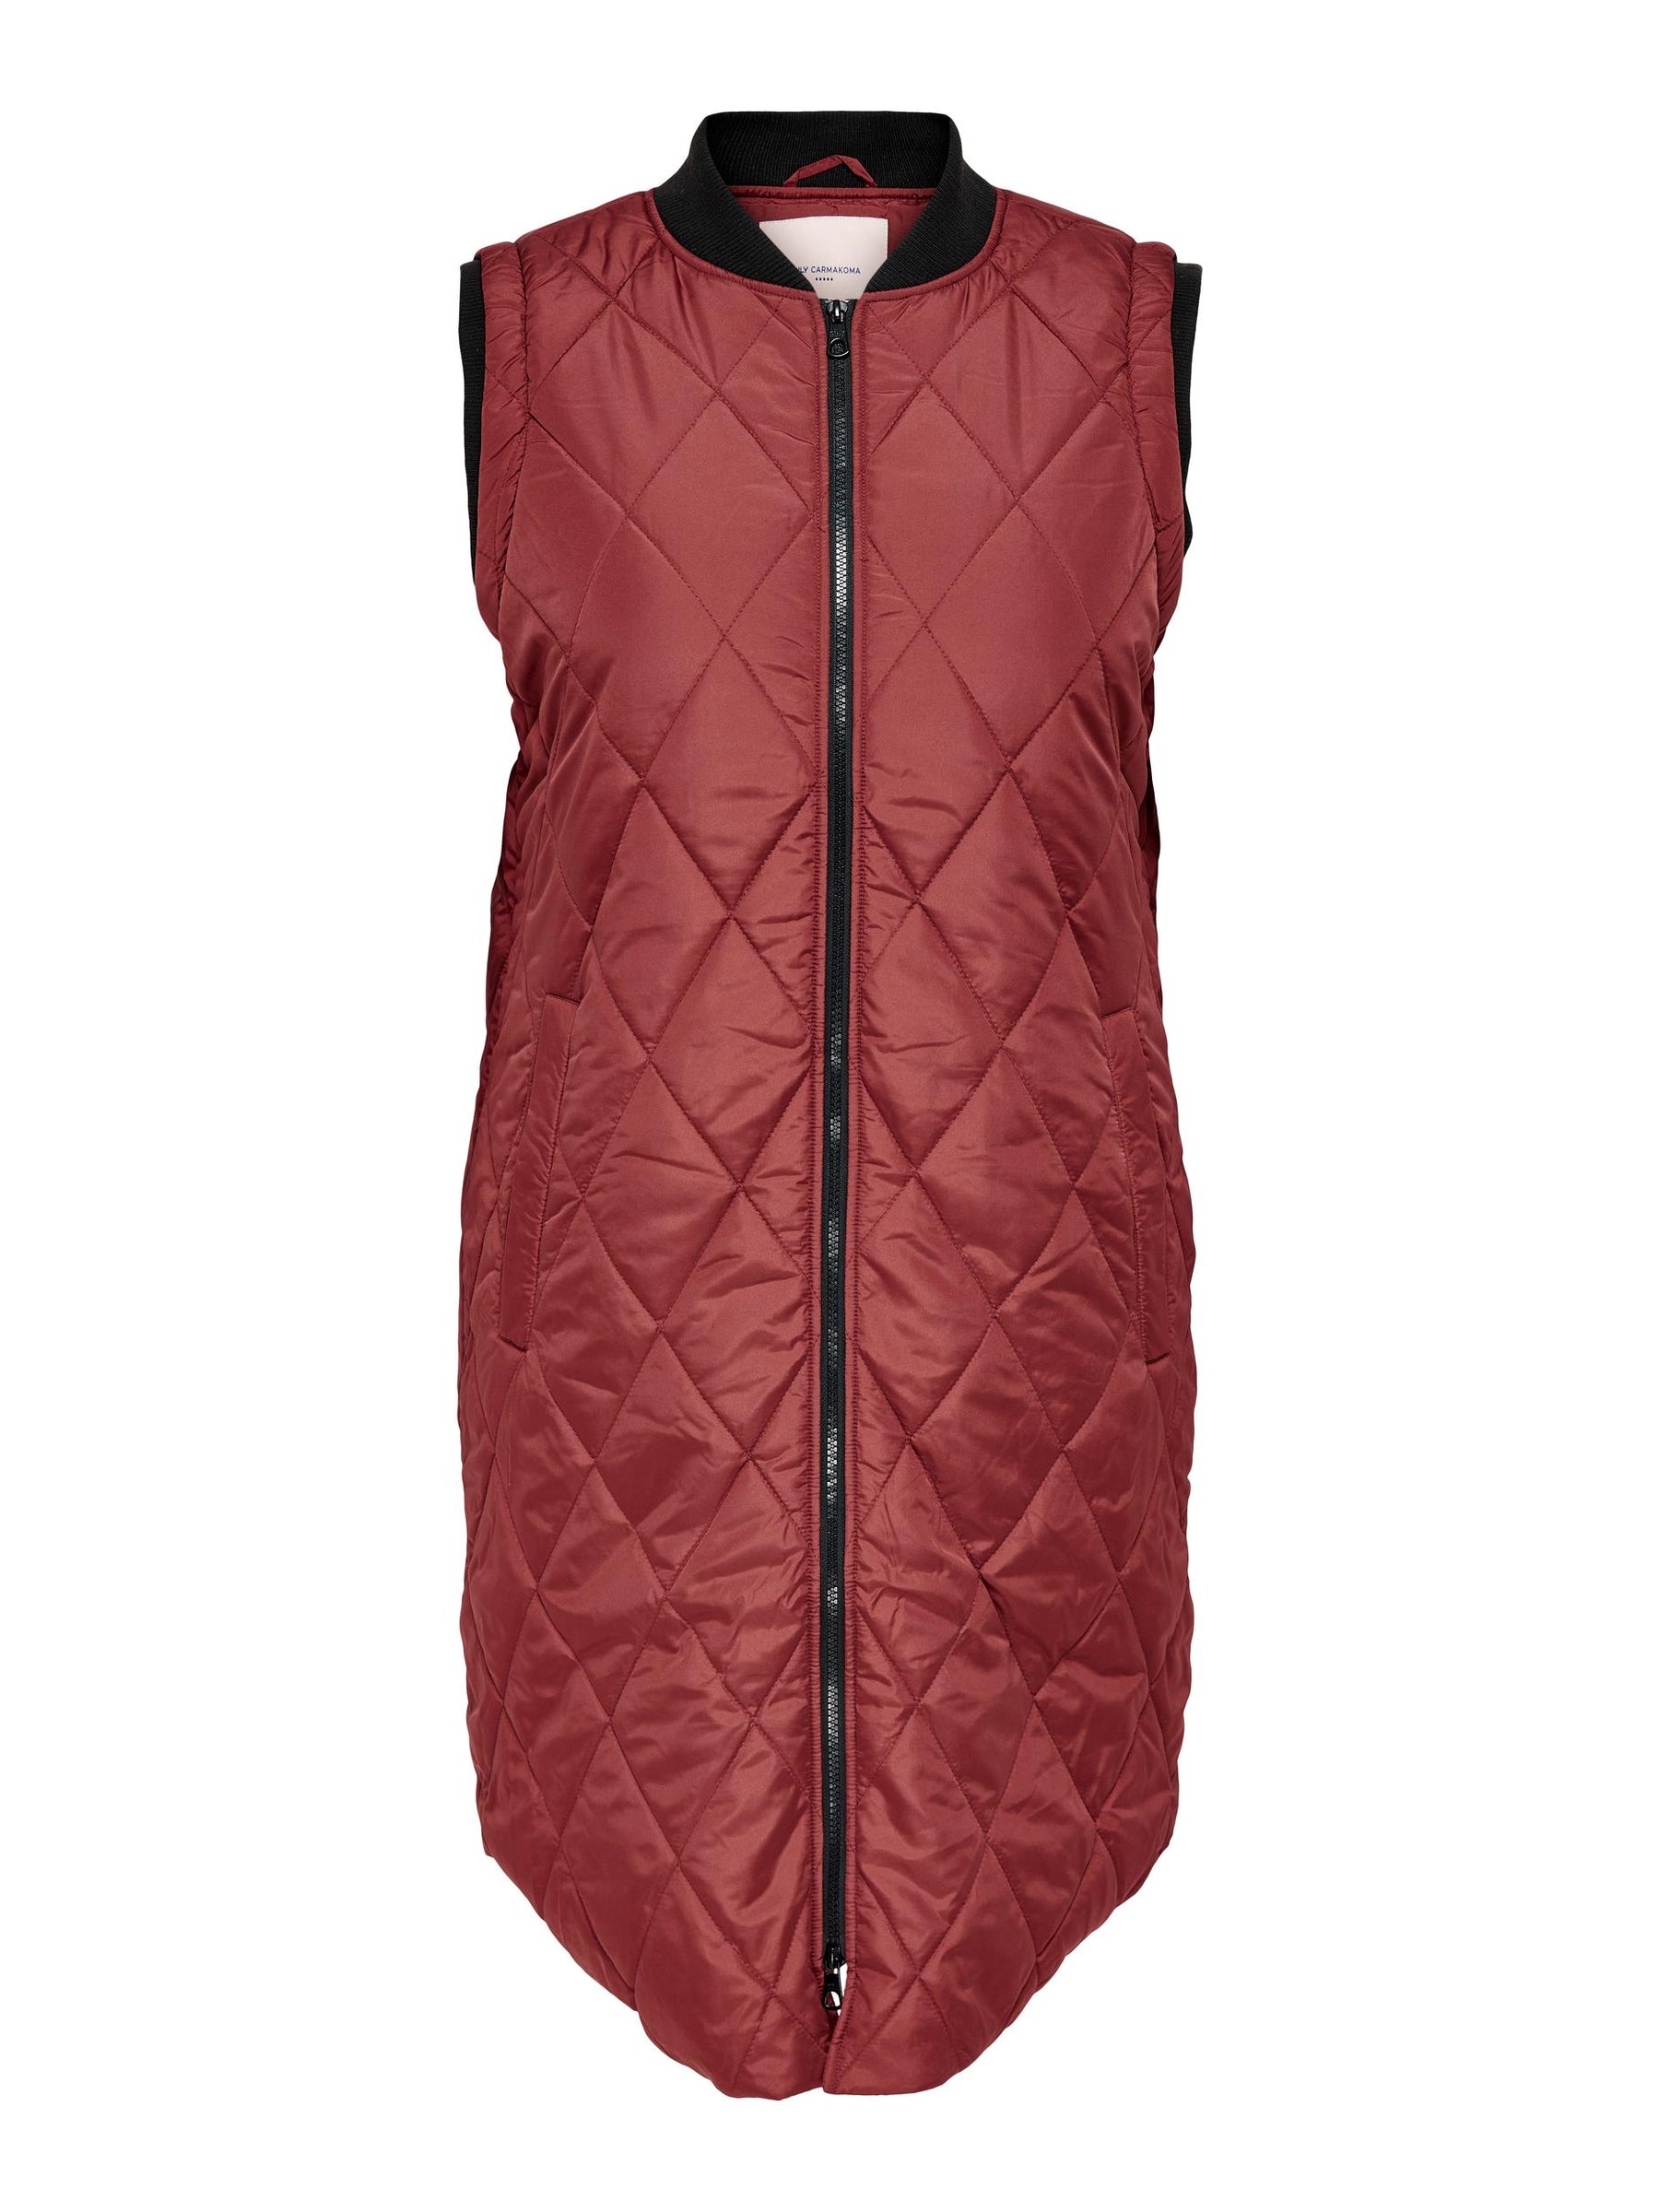 Only Carmakoma Longline Gilet in Spiced Apple